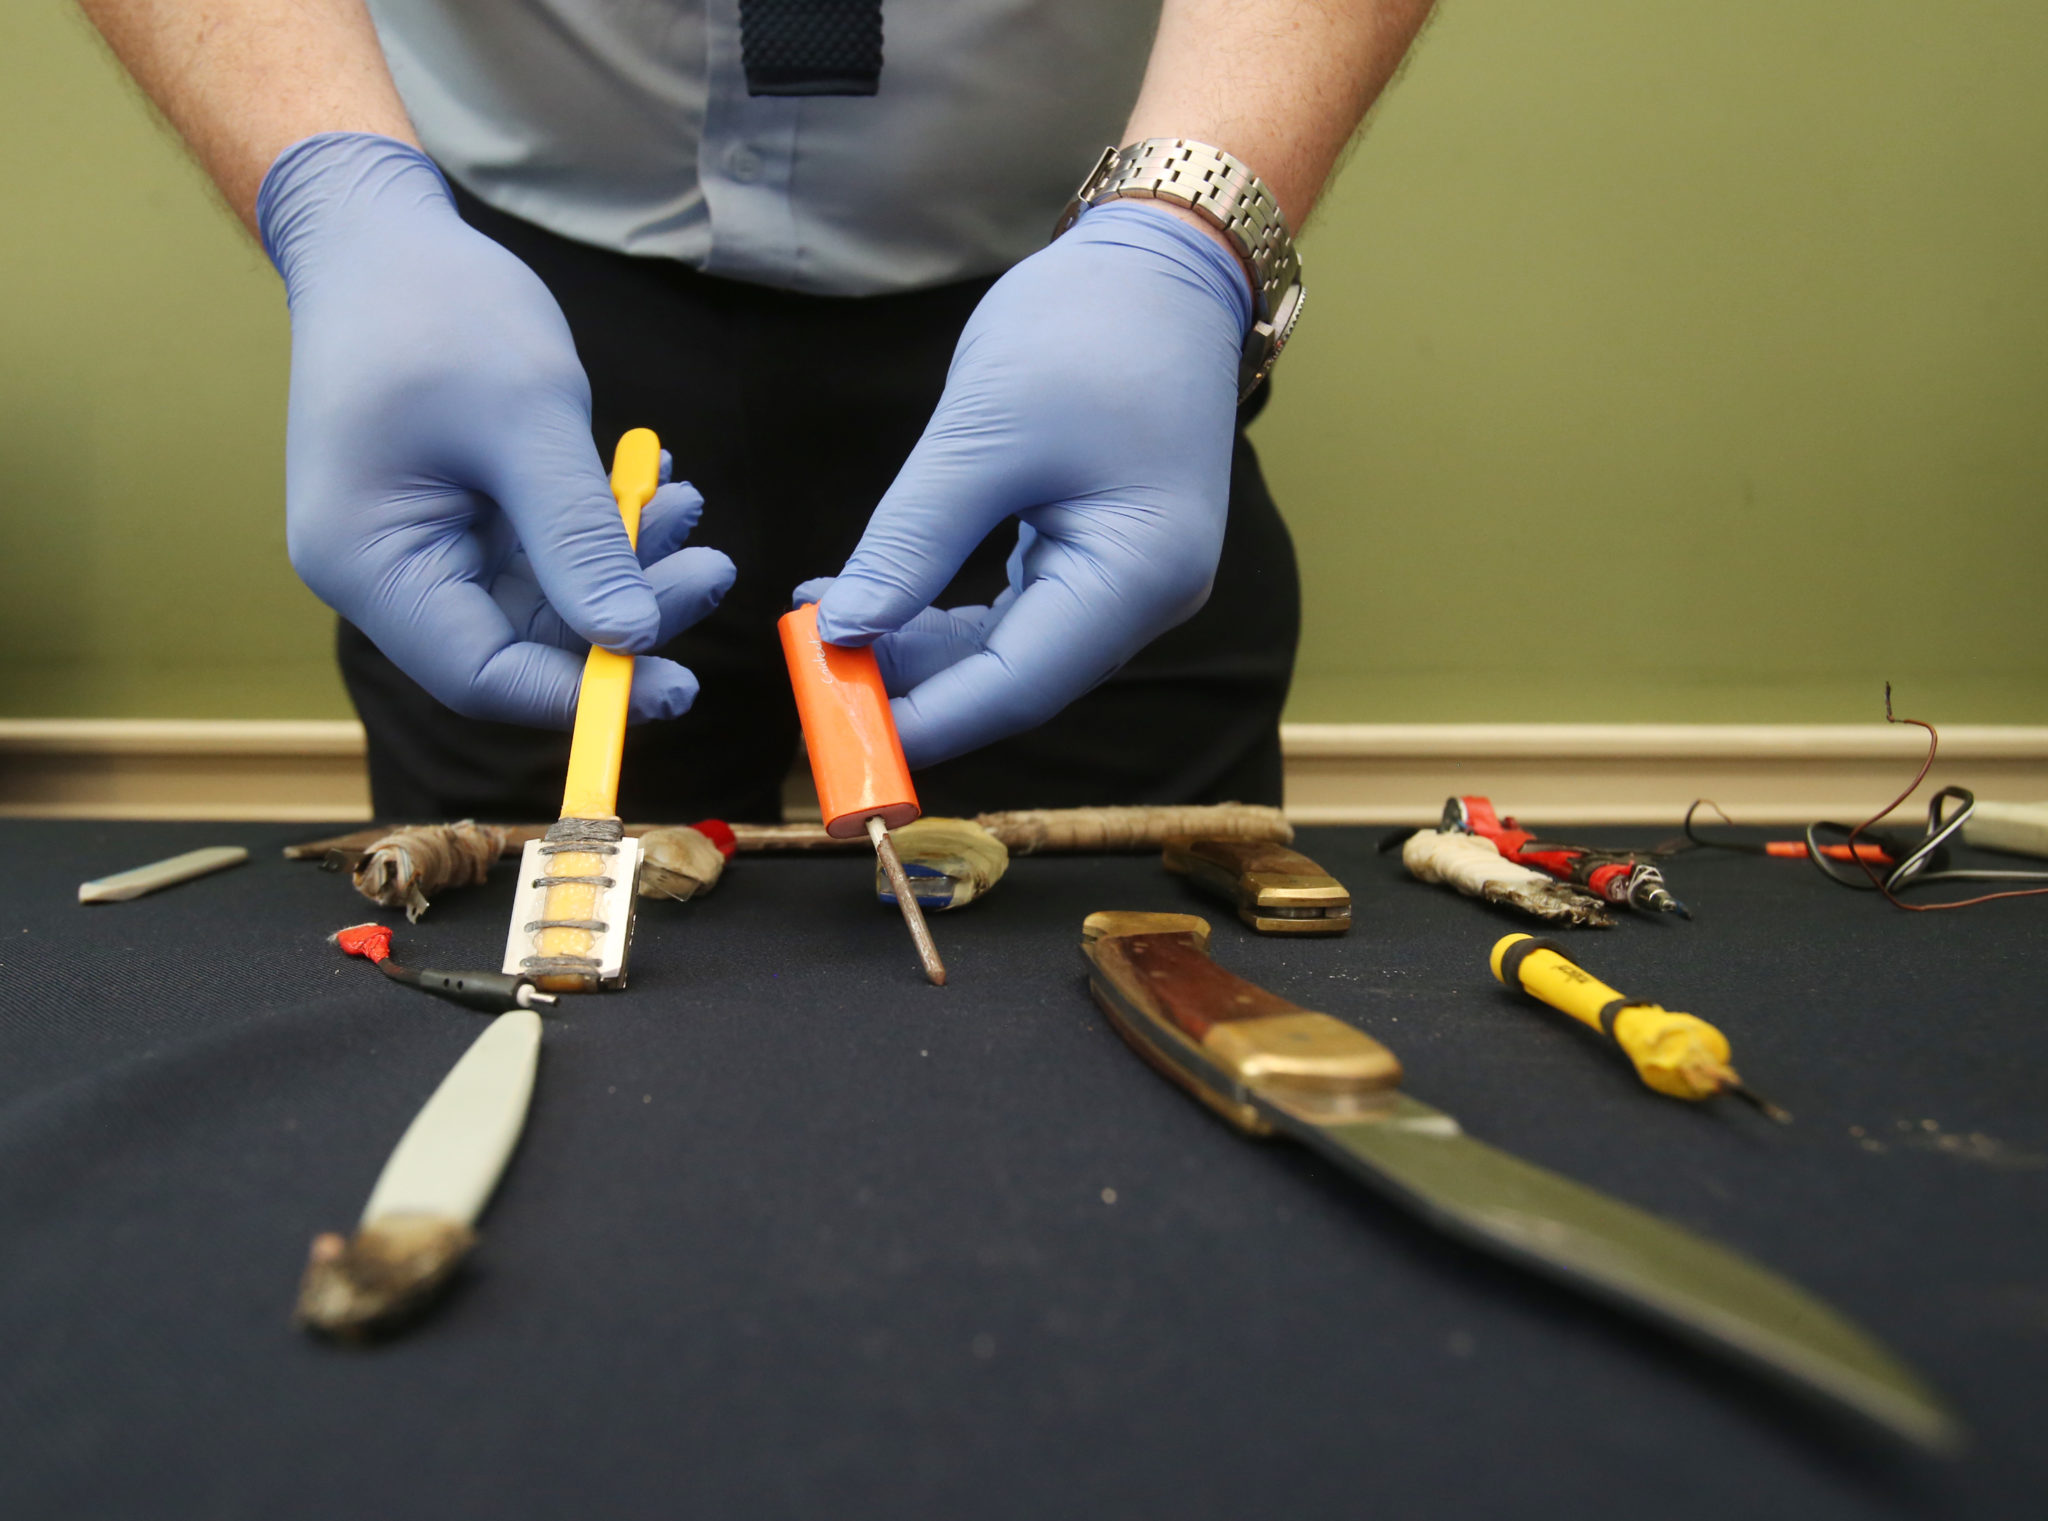 A prison officer shows weapons confiscated in prison